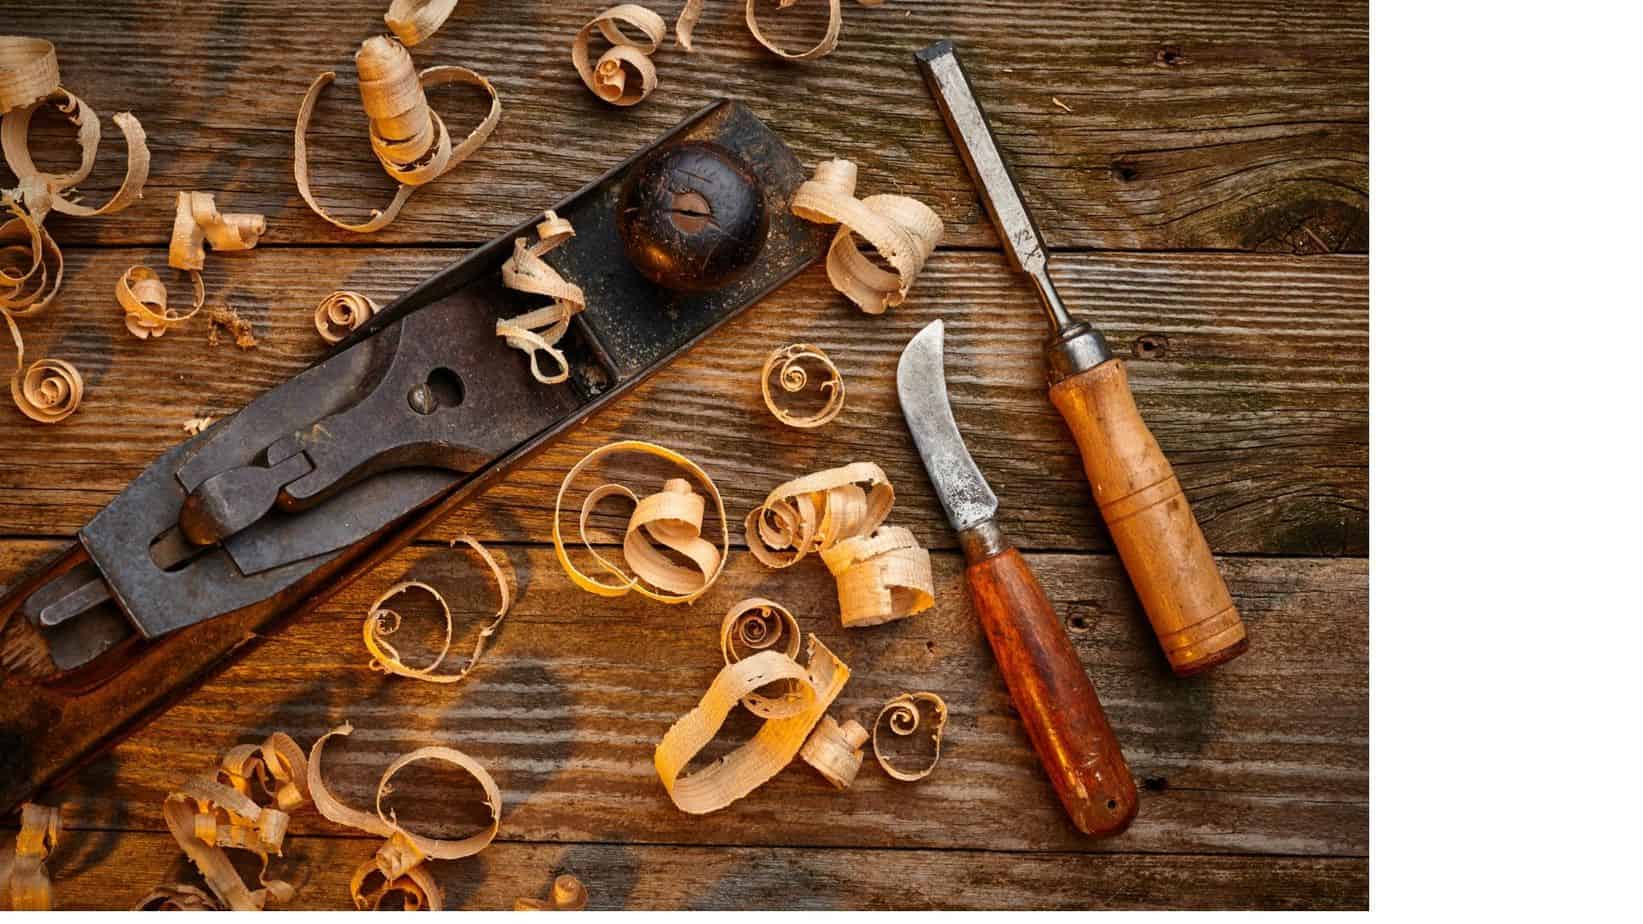 Photo of a woodworking plane and other carving tools